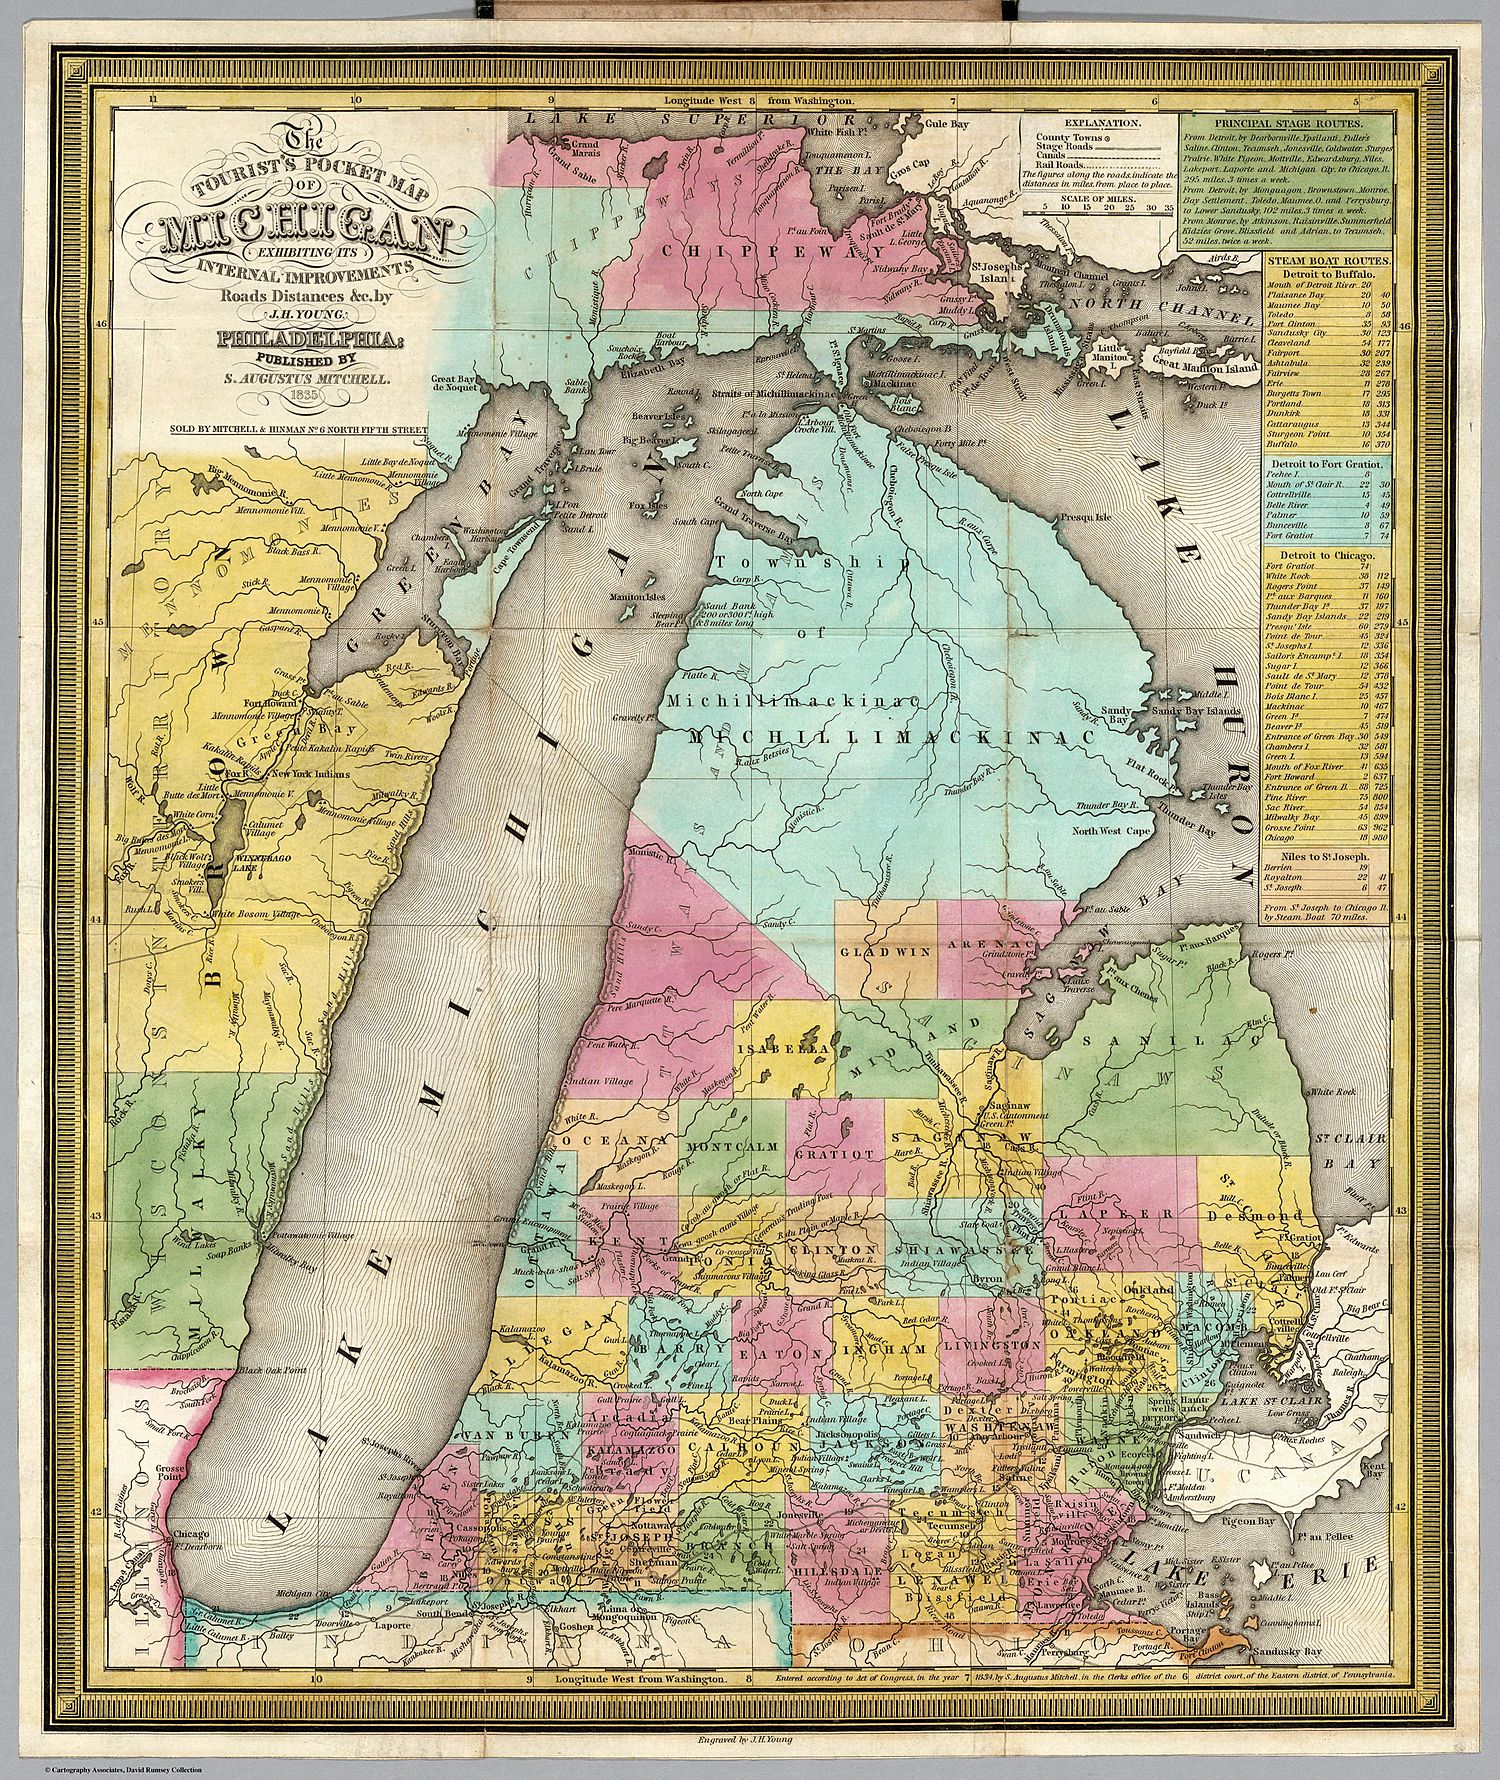 Wisconsin Territory depicted on this 1835 Tourist's Pocket Map Of Michigan, showing a Menominee-filled Brown County, Wisconsin that spans the northern half of the territory